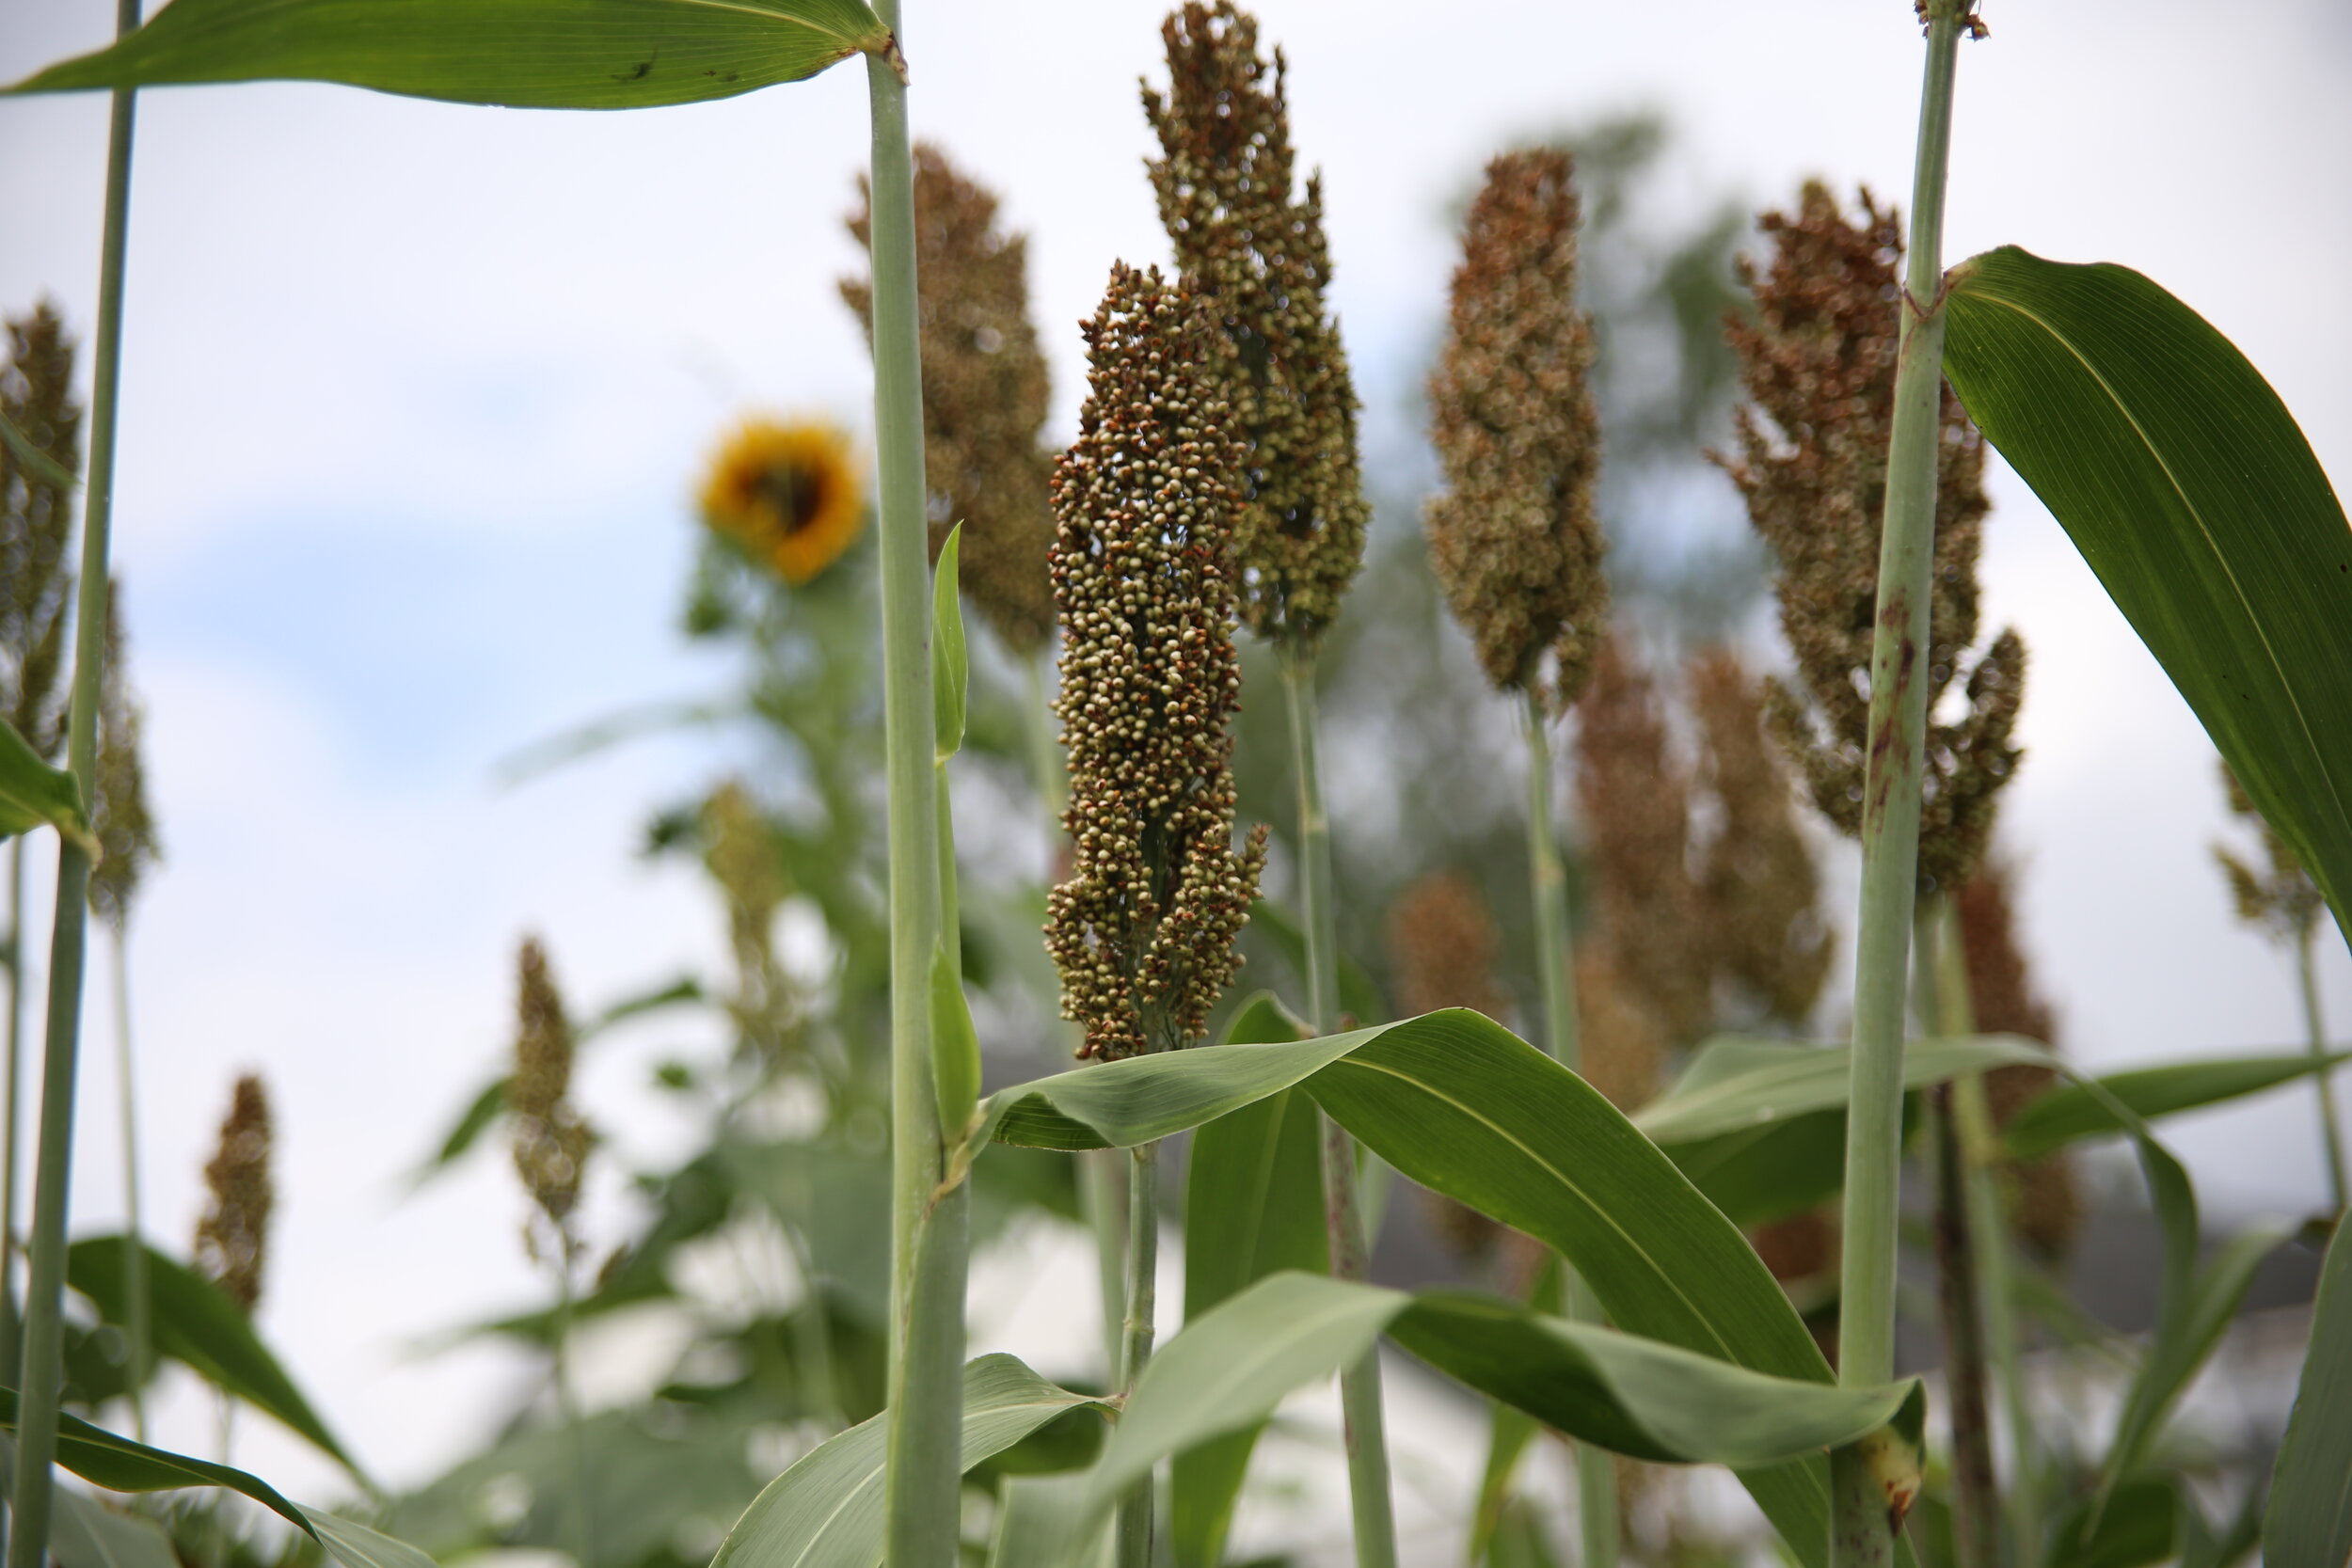  Sorghum, grown from seeds given to the BCCF by the Gemmer family.  